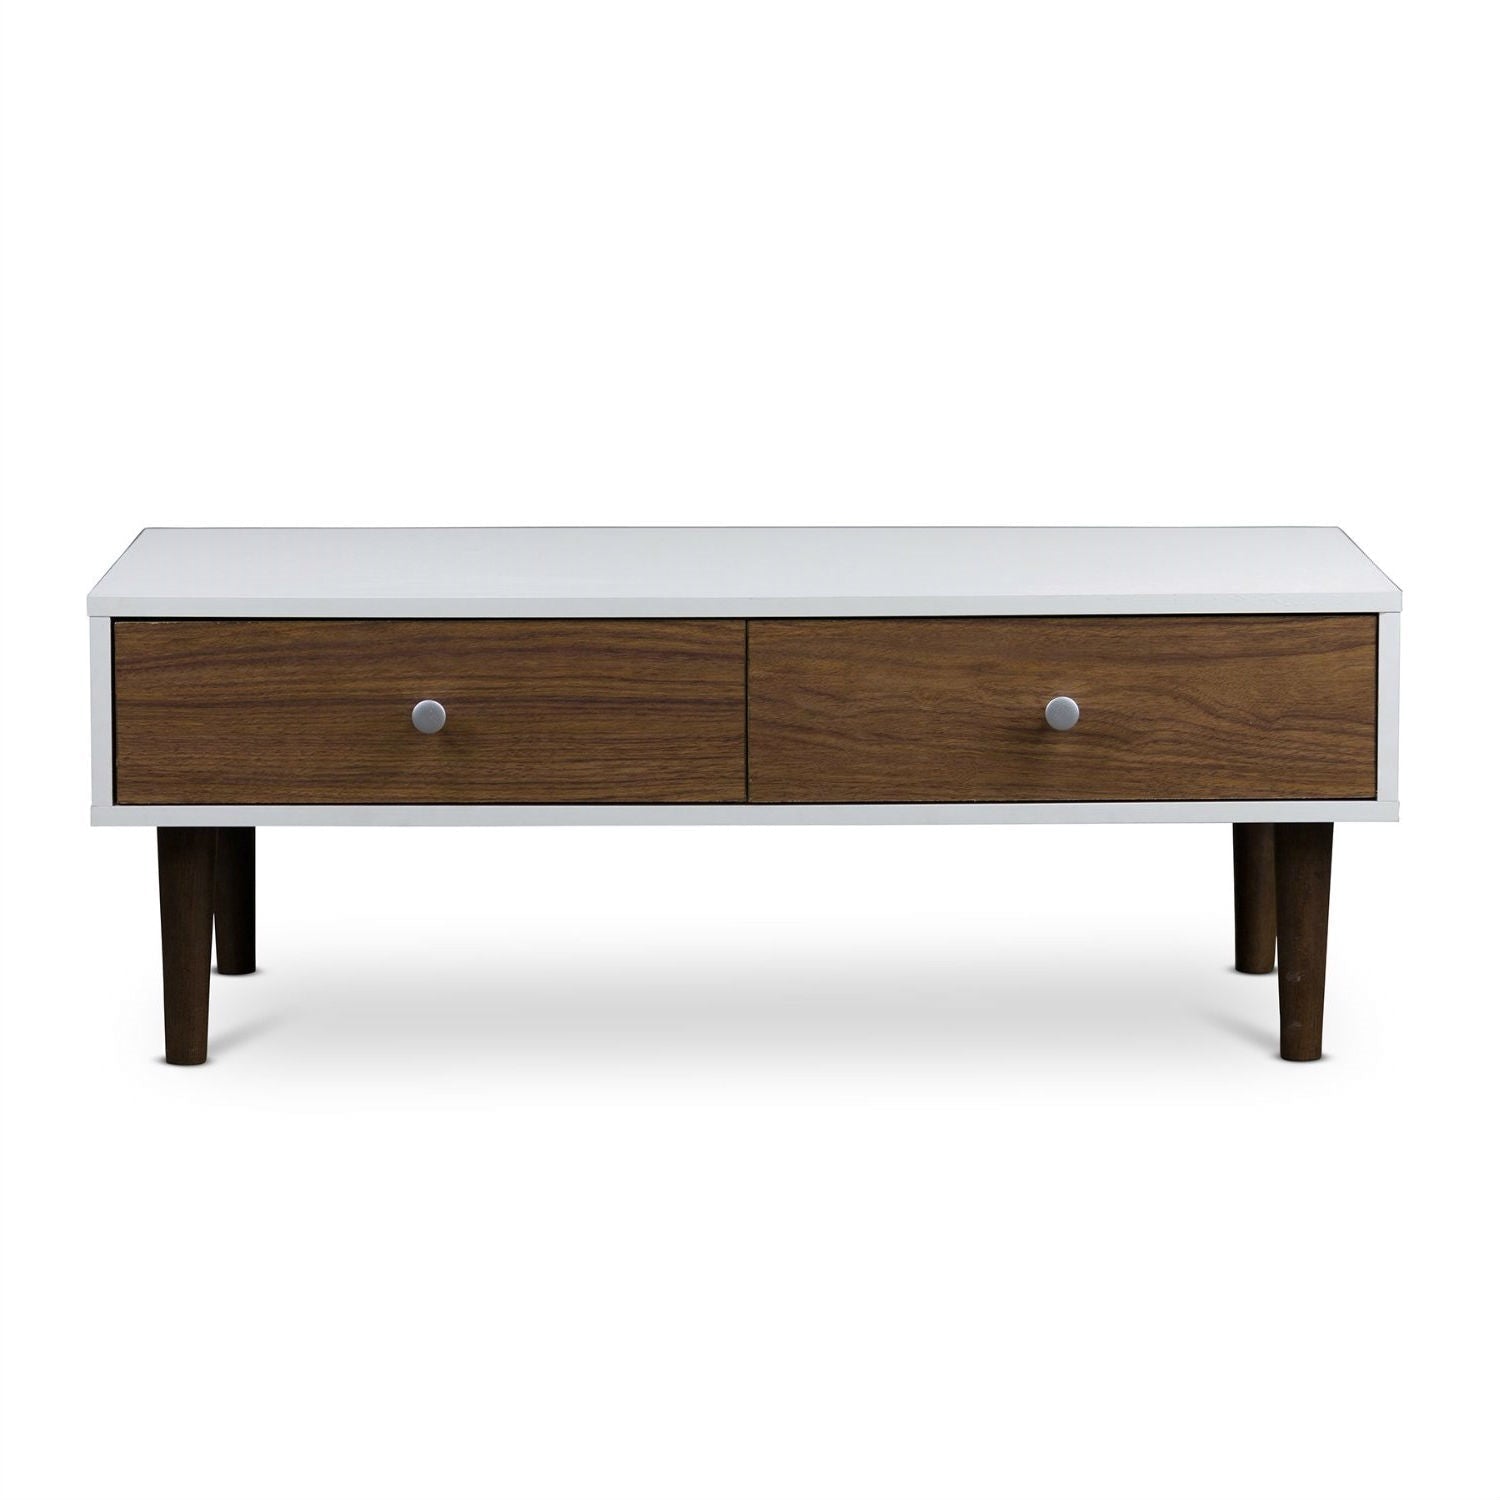 Living Room > Coffee Tables - Modern Mid-Century Style White Wood Coffee Table With 2 Drawers